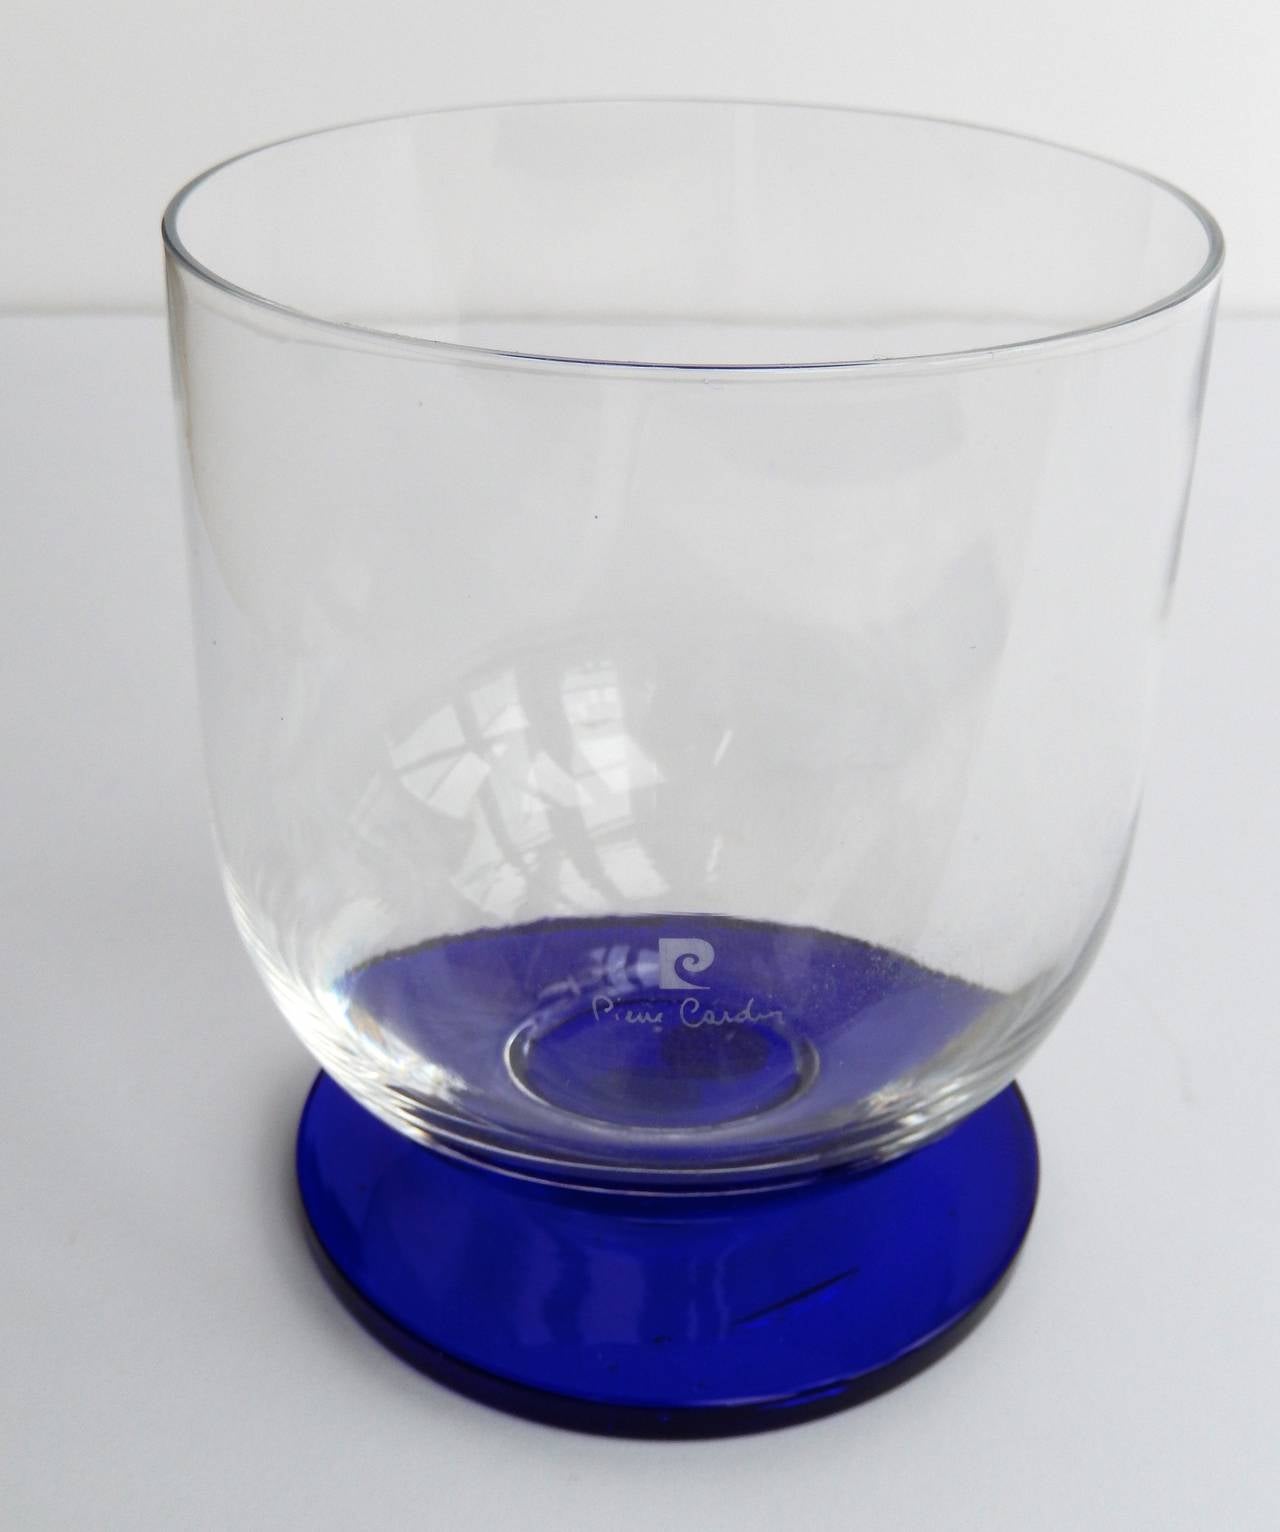 A rare 1970s ice bucket by Pierre Cardin with a modernist design. The combination of a clear glass bowl with a beautiful French blue glass base is striking. Etched signature and logo. 

Reference: See p. 192 in Pierre Cardin Evolution by Benjamin